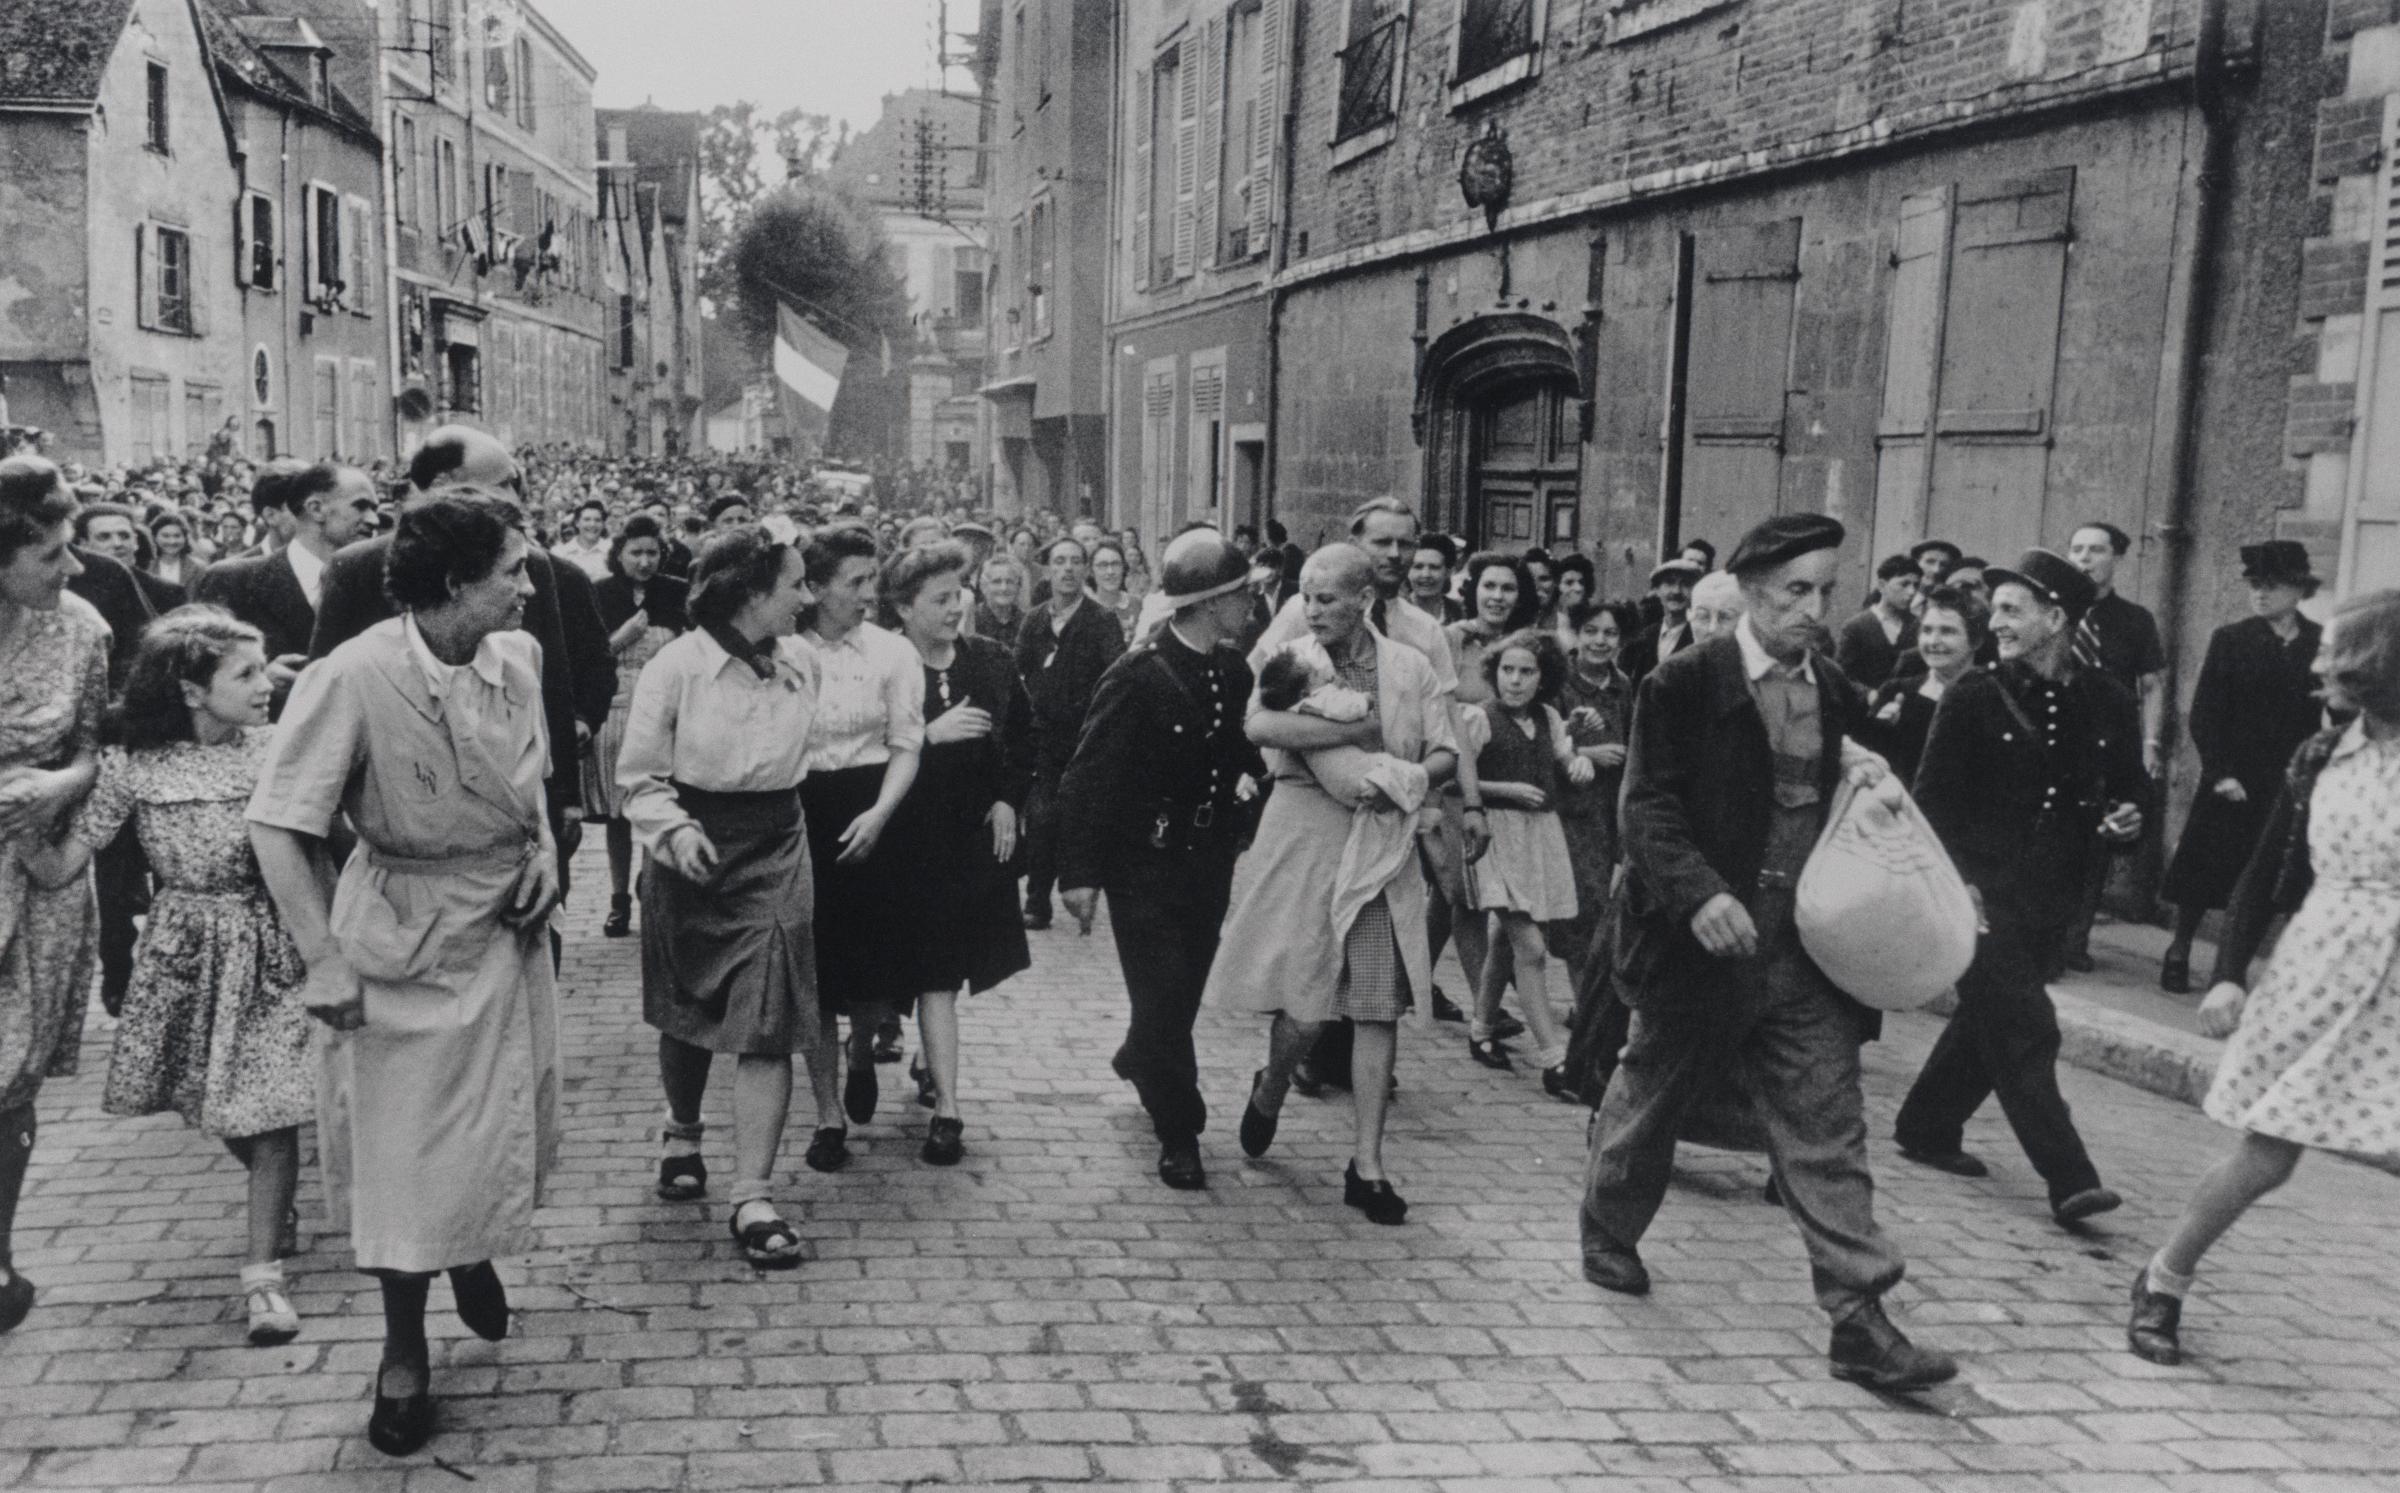 FRANCE. Chartres. August 18th, 1944. French woman, who had had a baby by a Germany soldier, being marched home after being punished by having her head shaved.